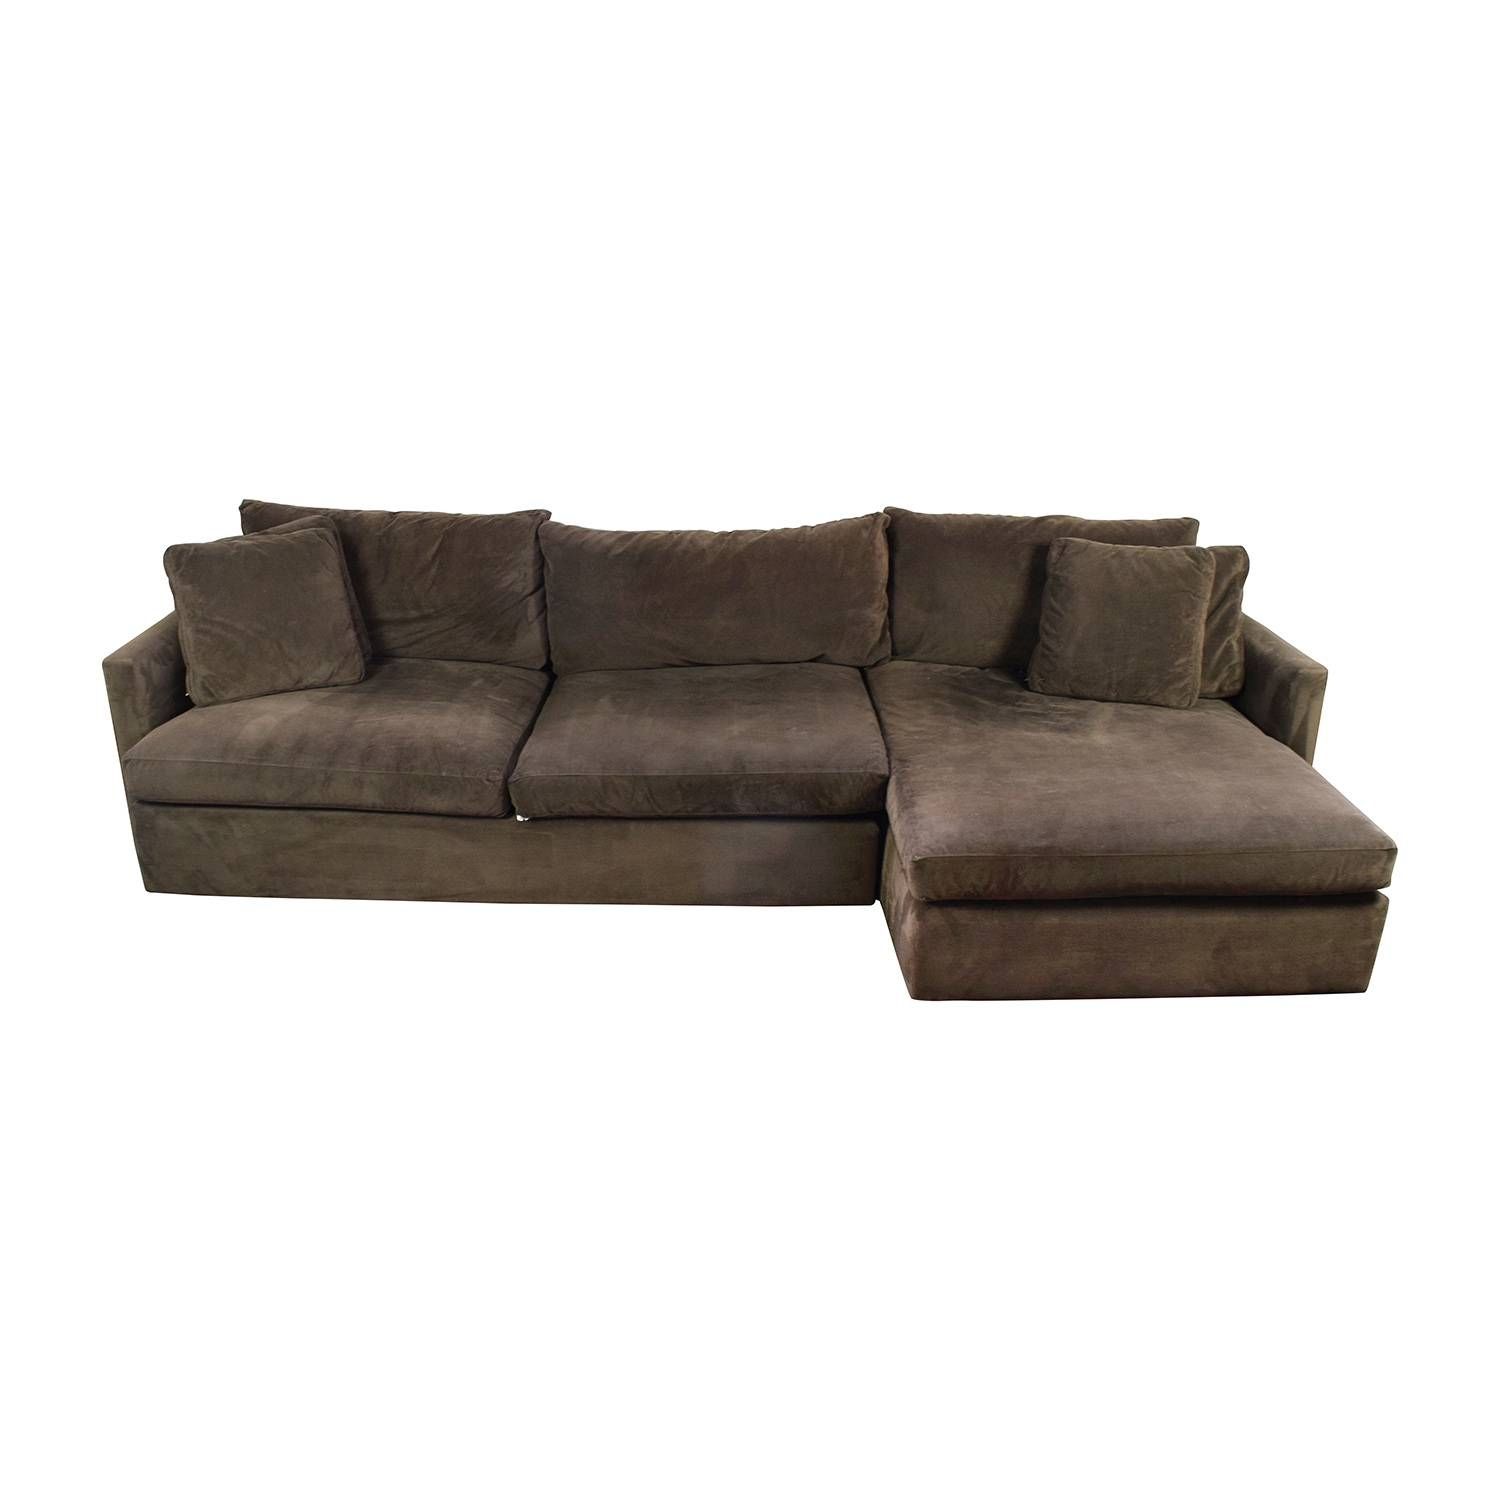 89% Off – Crate And Barrel Crate & Barrel Brown Left Arm Sectional Regarding Crate And Barrel Sectional Sofas (View 6 of 30)